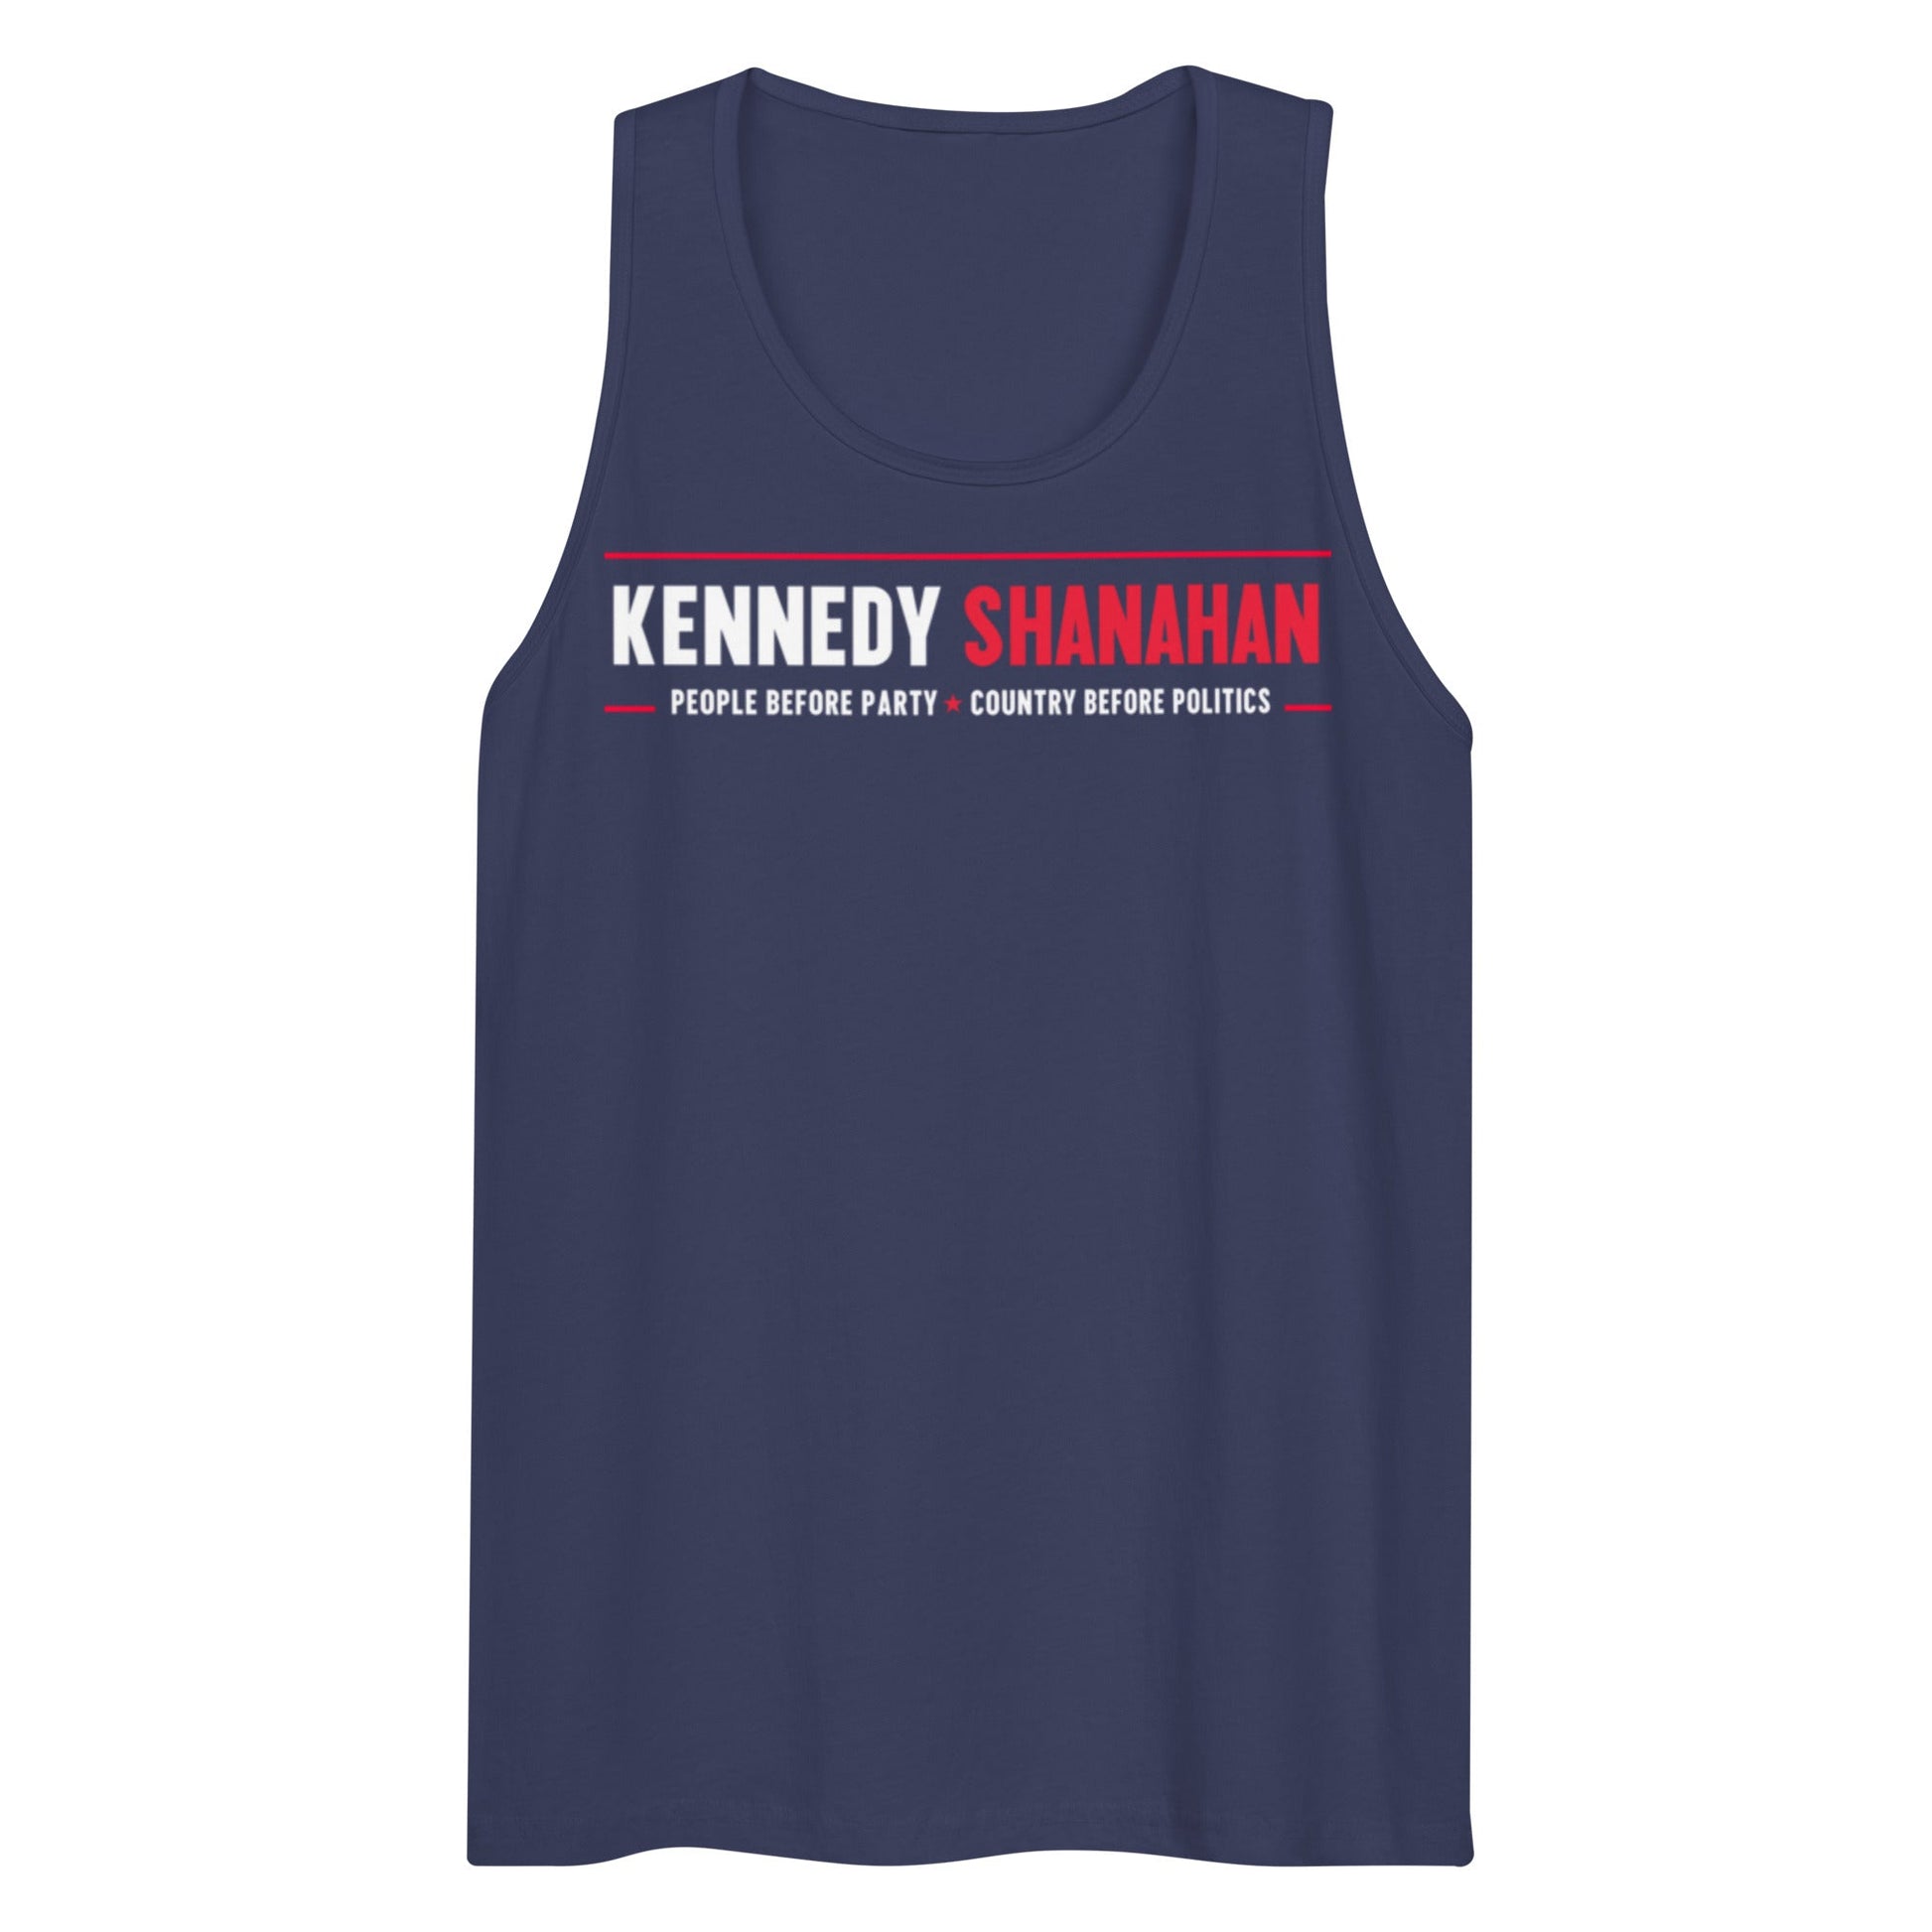 Kennedy Shanahan | People before Party, Country before Politics Men’s Top - TEAM KENNEDY. All rights reserved